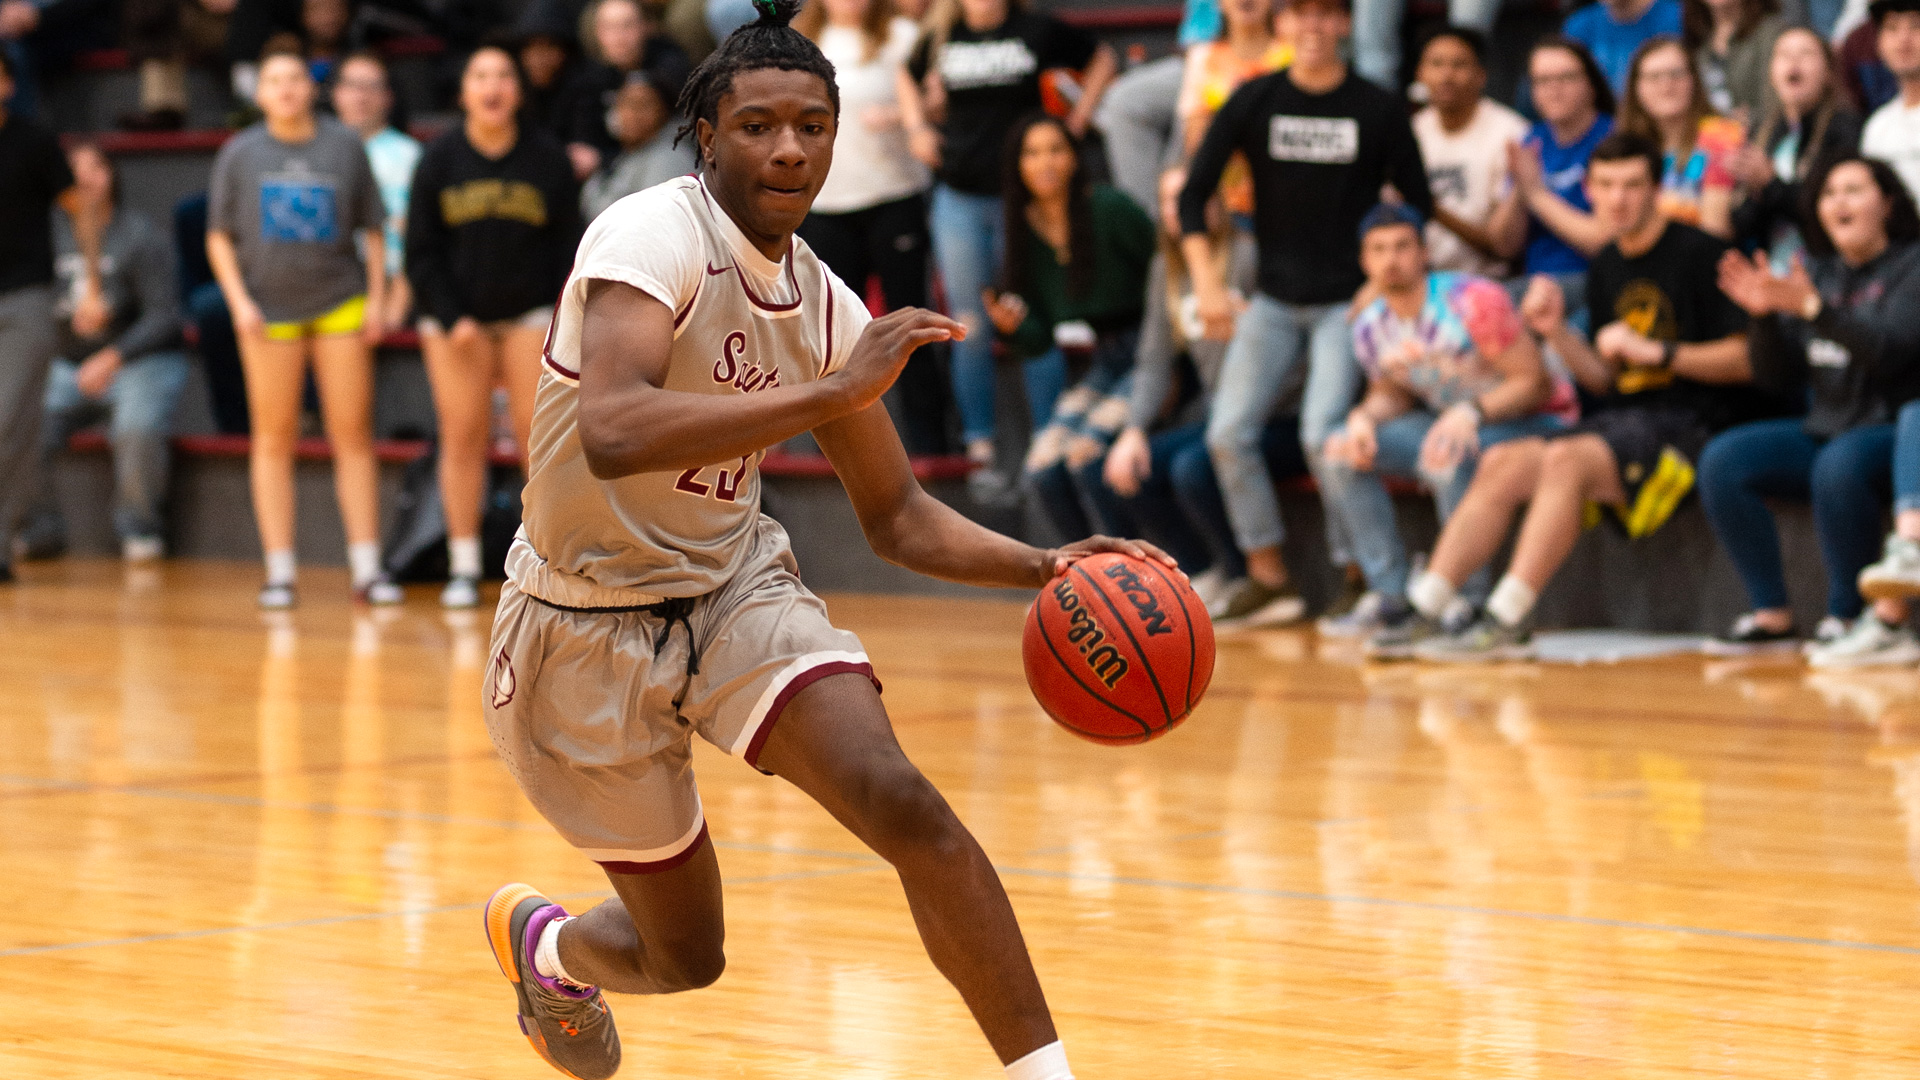 CCCB freshman Andre Johnson scored a career-high 26 points on 12-for-14 shooting on Saturday during the seventh-ranked Saints' 89-73 win at Ozark Christian College.